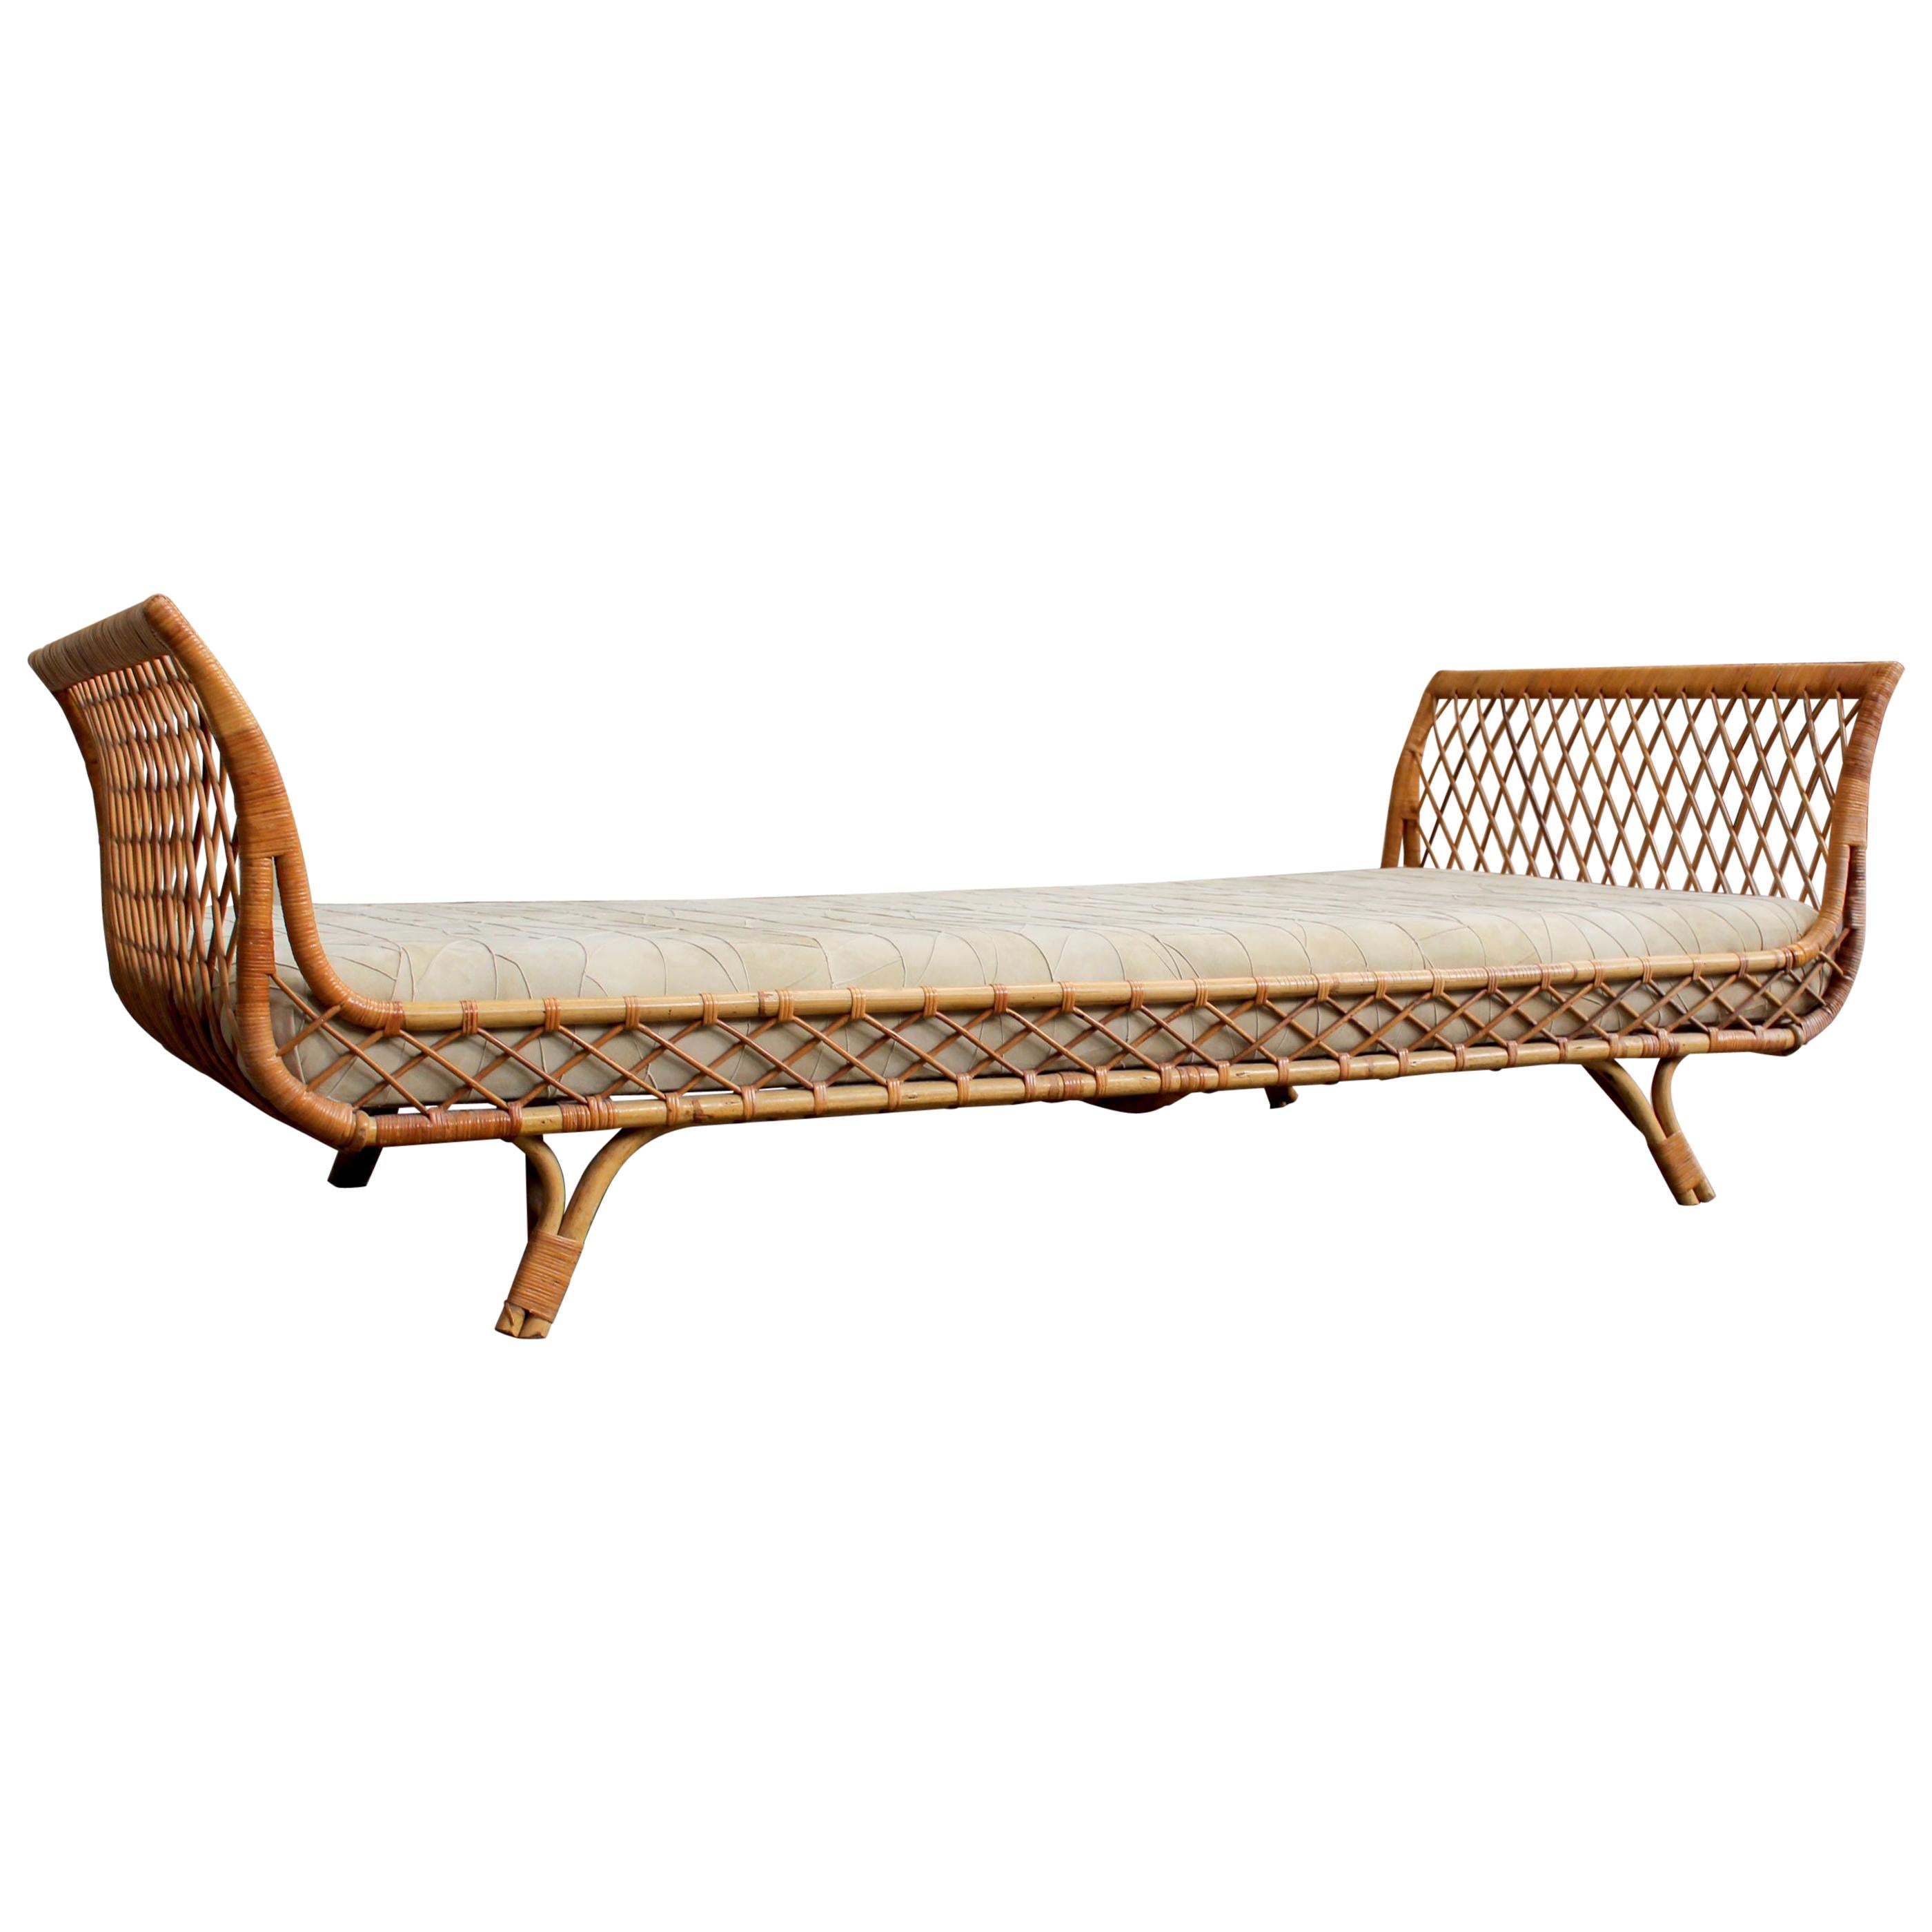 Daybed Rattan and Velvet Calf in the Spirit of Jean Royere